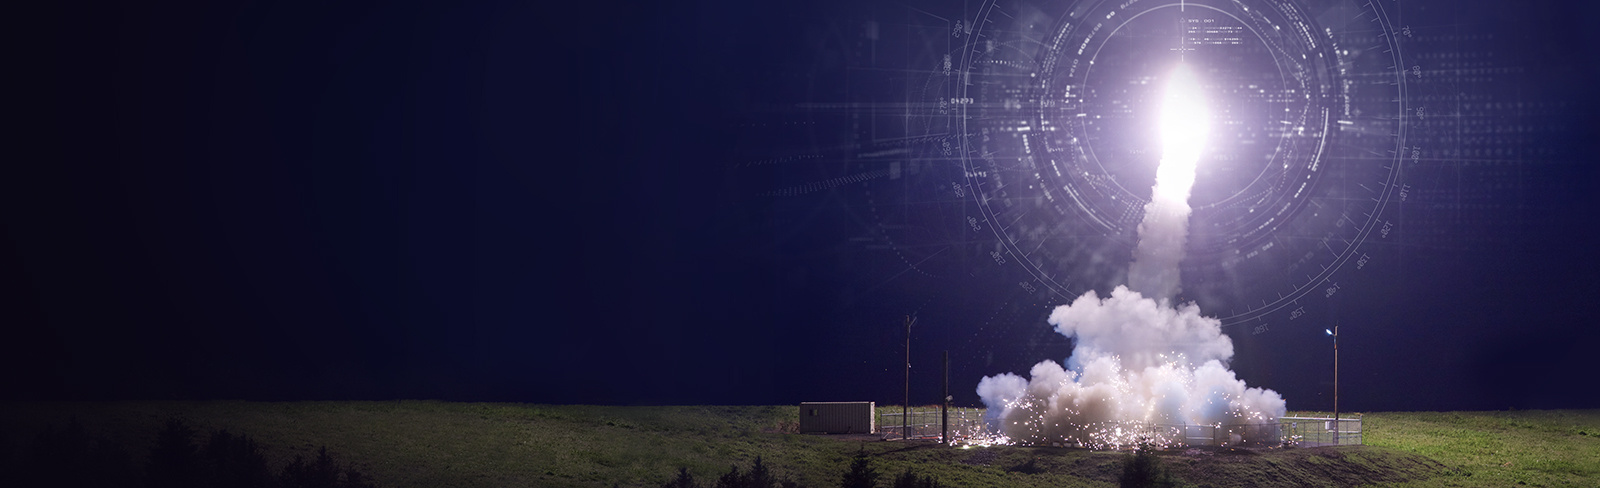 A THAAD interceptor launches from the ground, lighting up the night sky. An artist’s graphic overlay on the photo represents guidance technology.